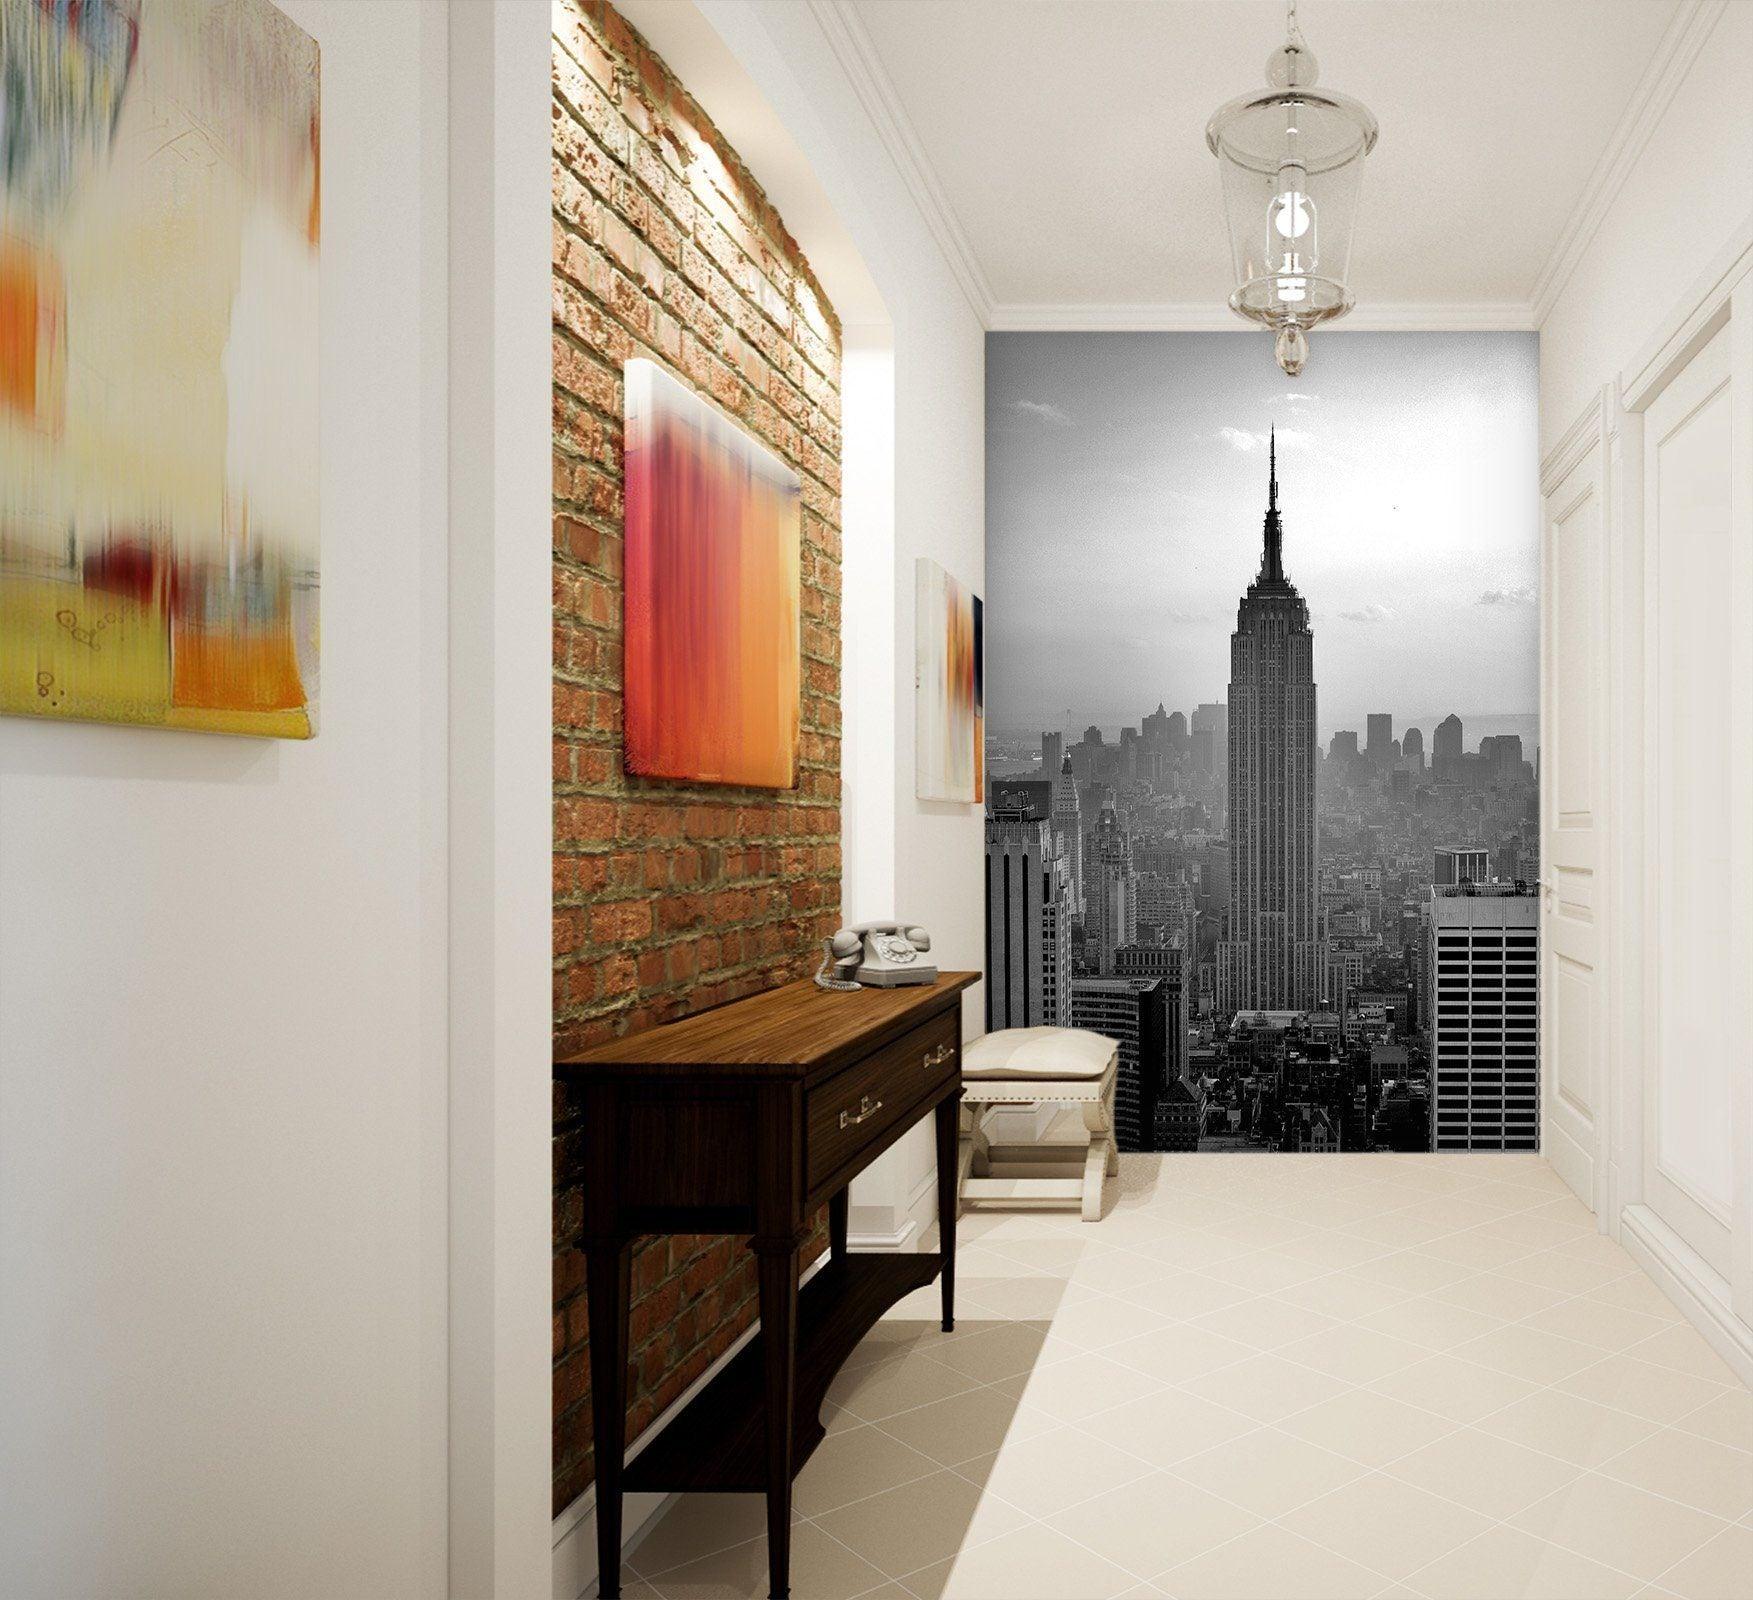 3D black and white city 113 wall murals- Jess Art Decoration